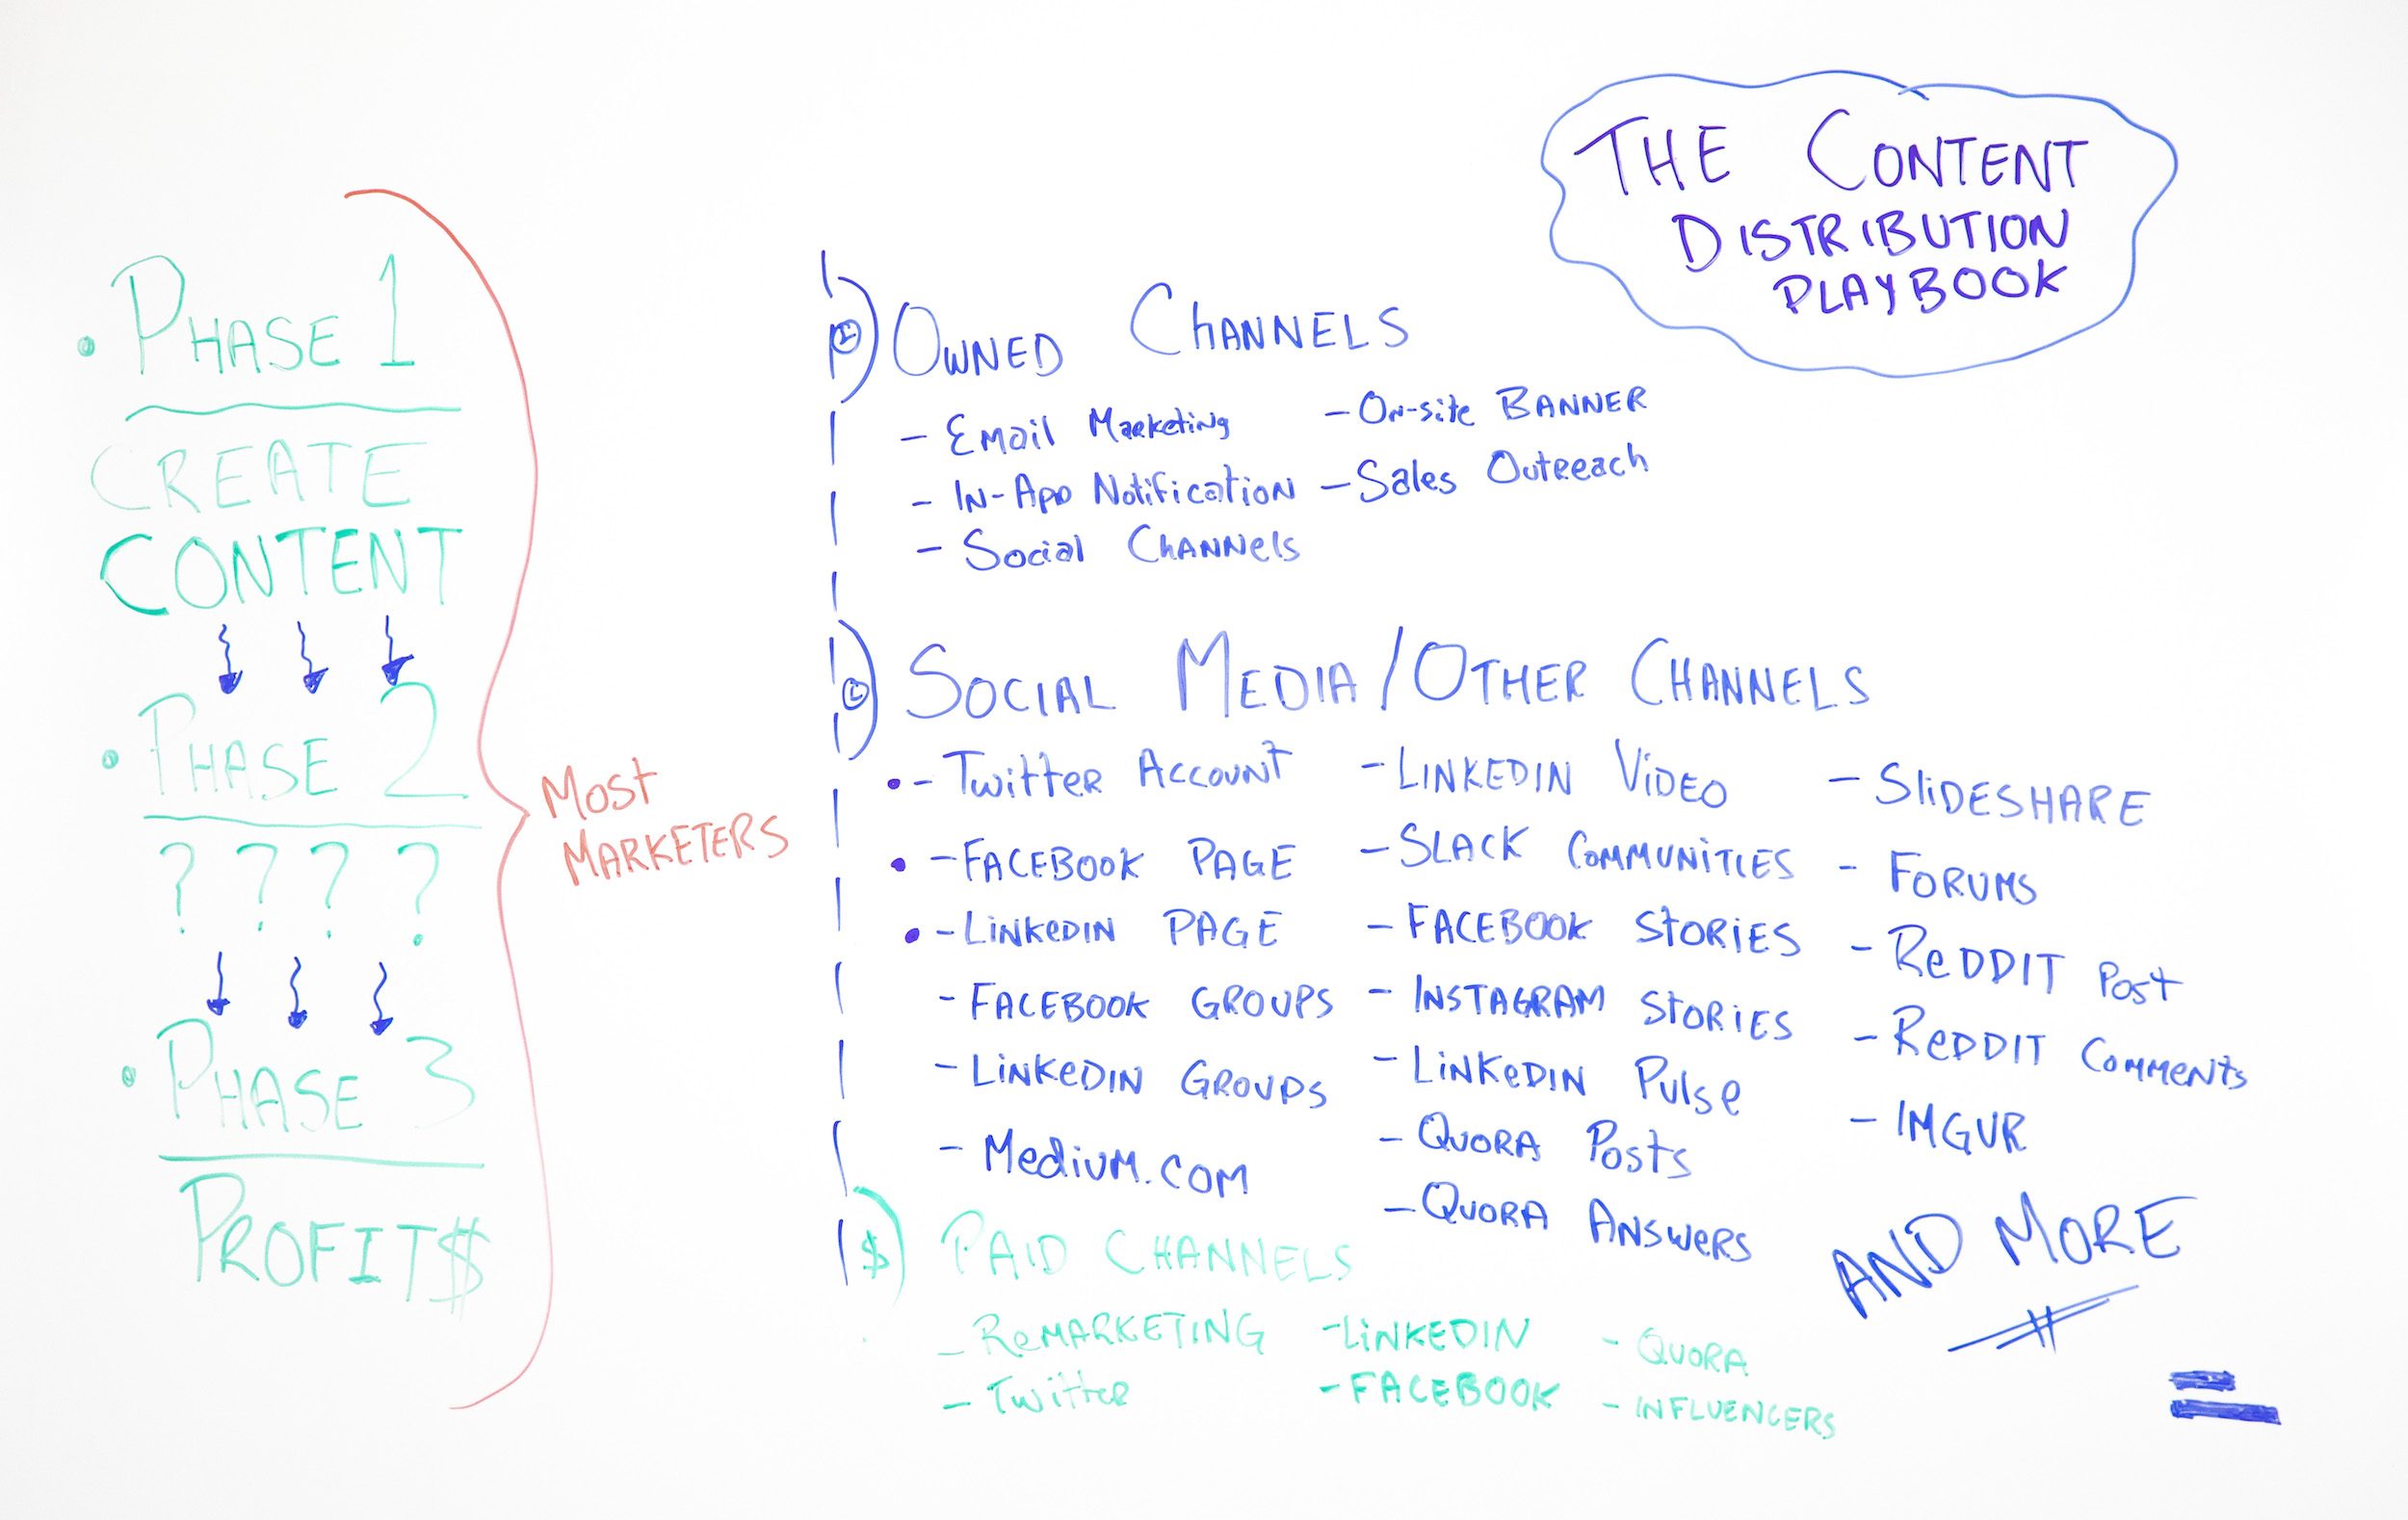 the-content-distribution-playbook-whiteboard-friday-moz-blog-9305904